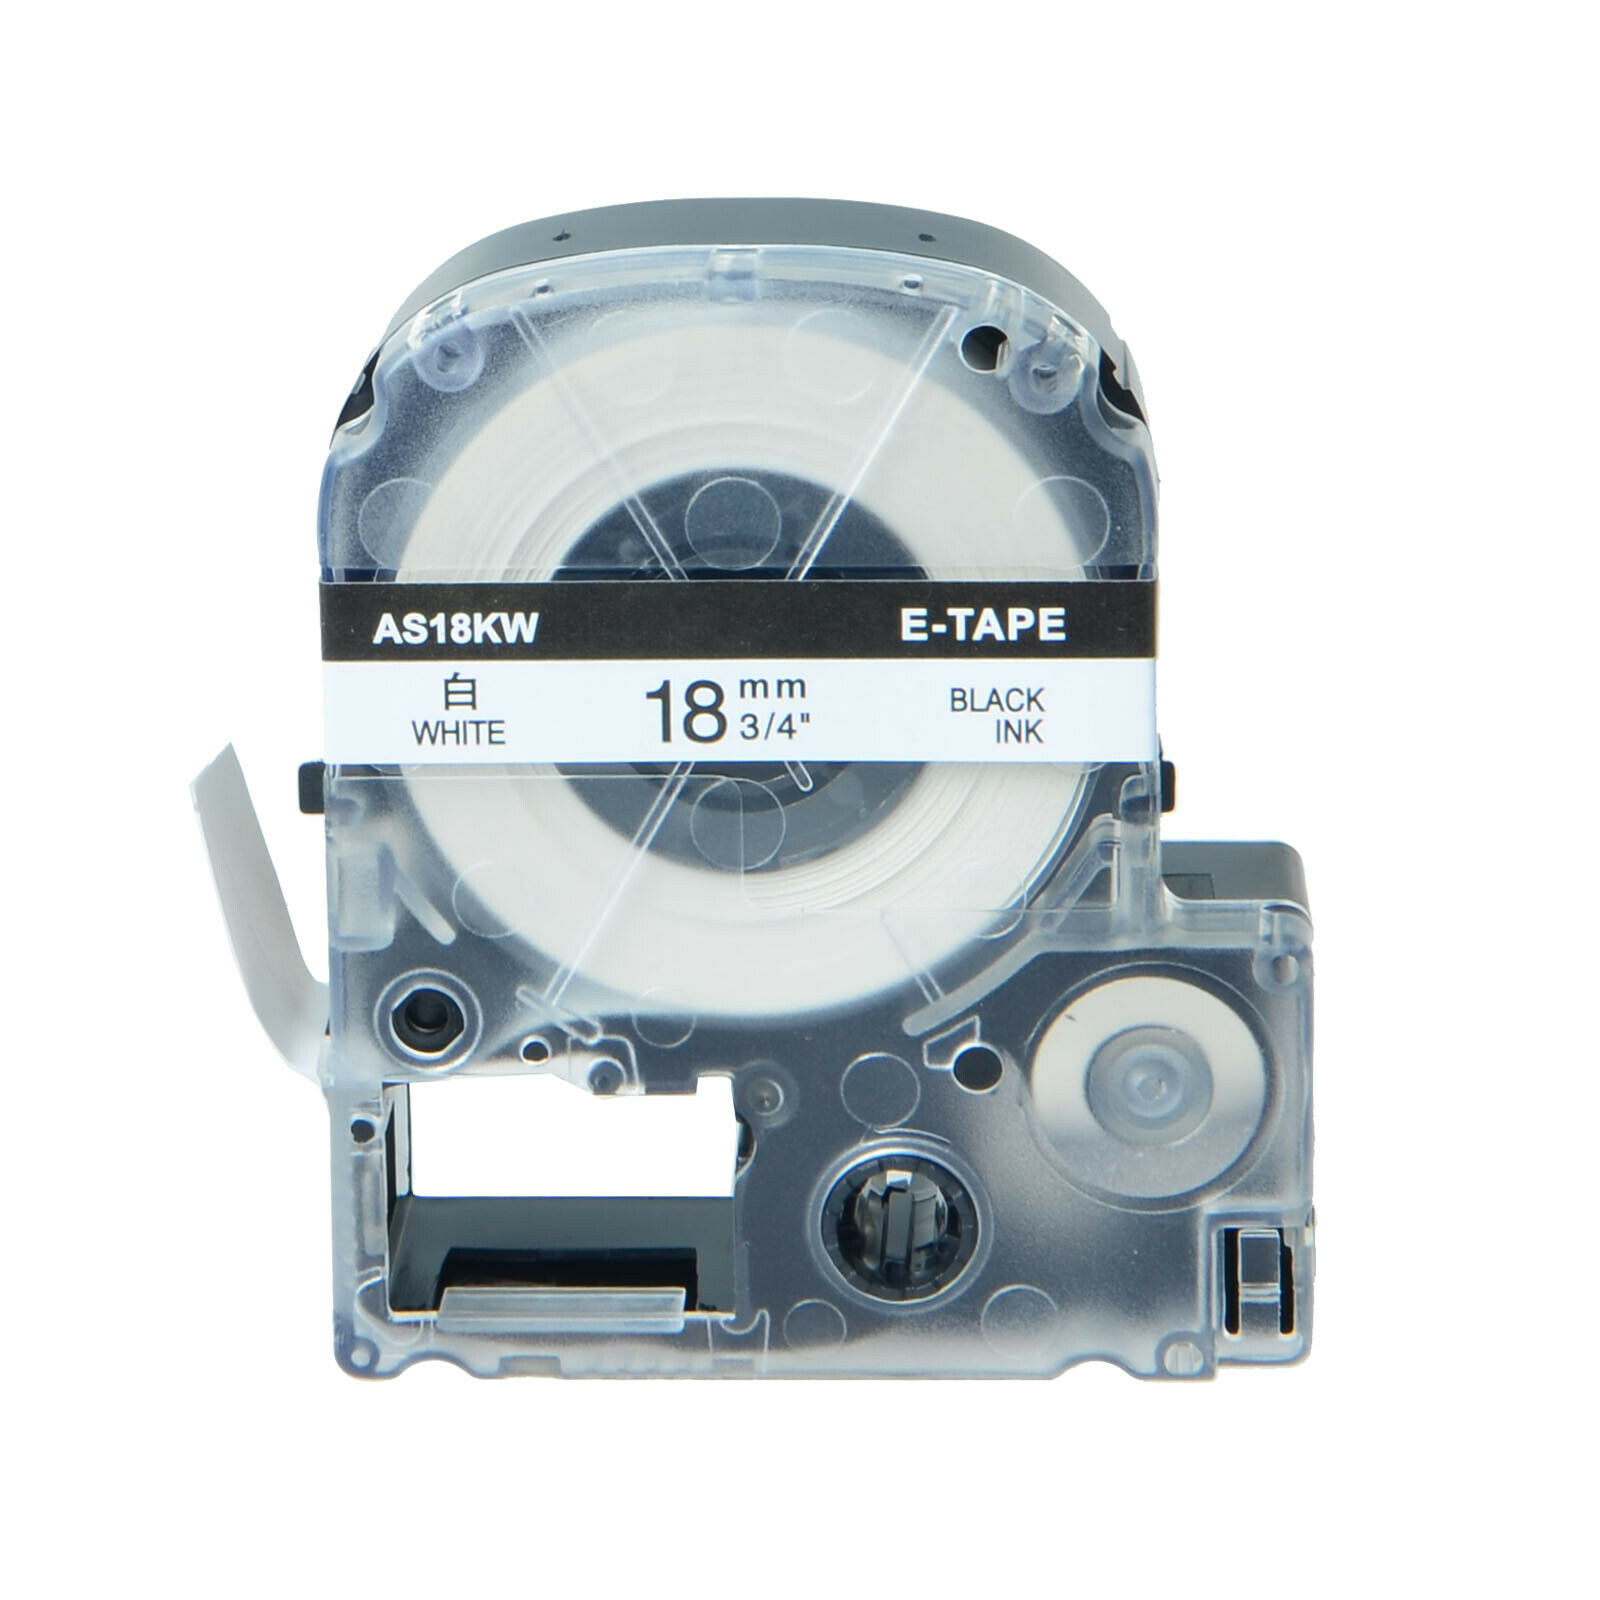 Compatible 218BW 218BWPX PX Tape for K-Sun Epson LabelShop Black on White.